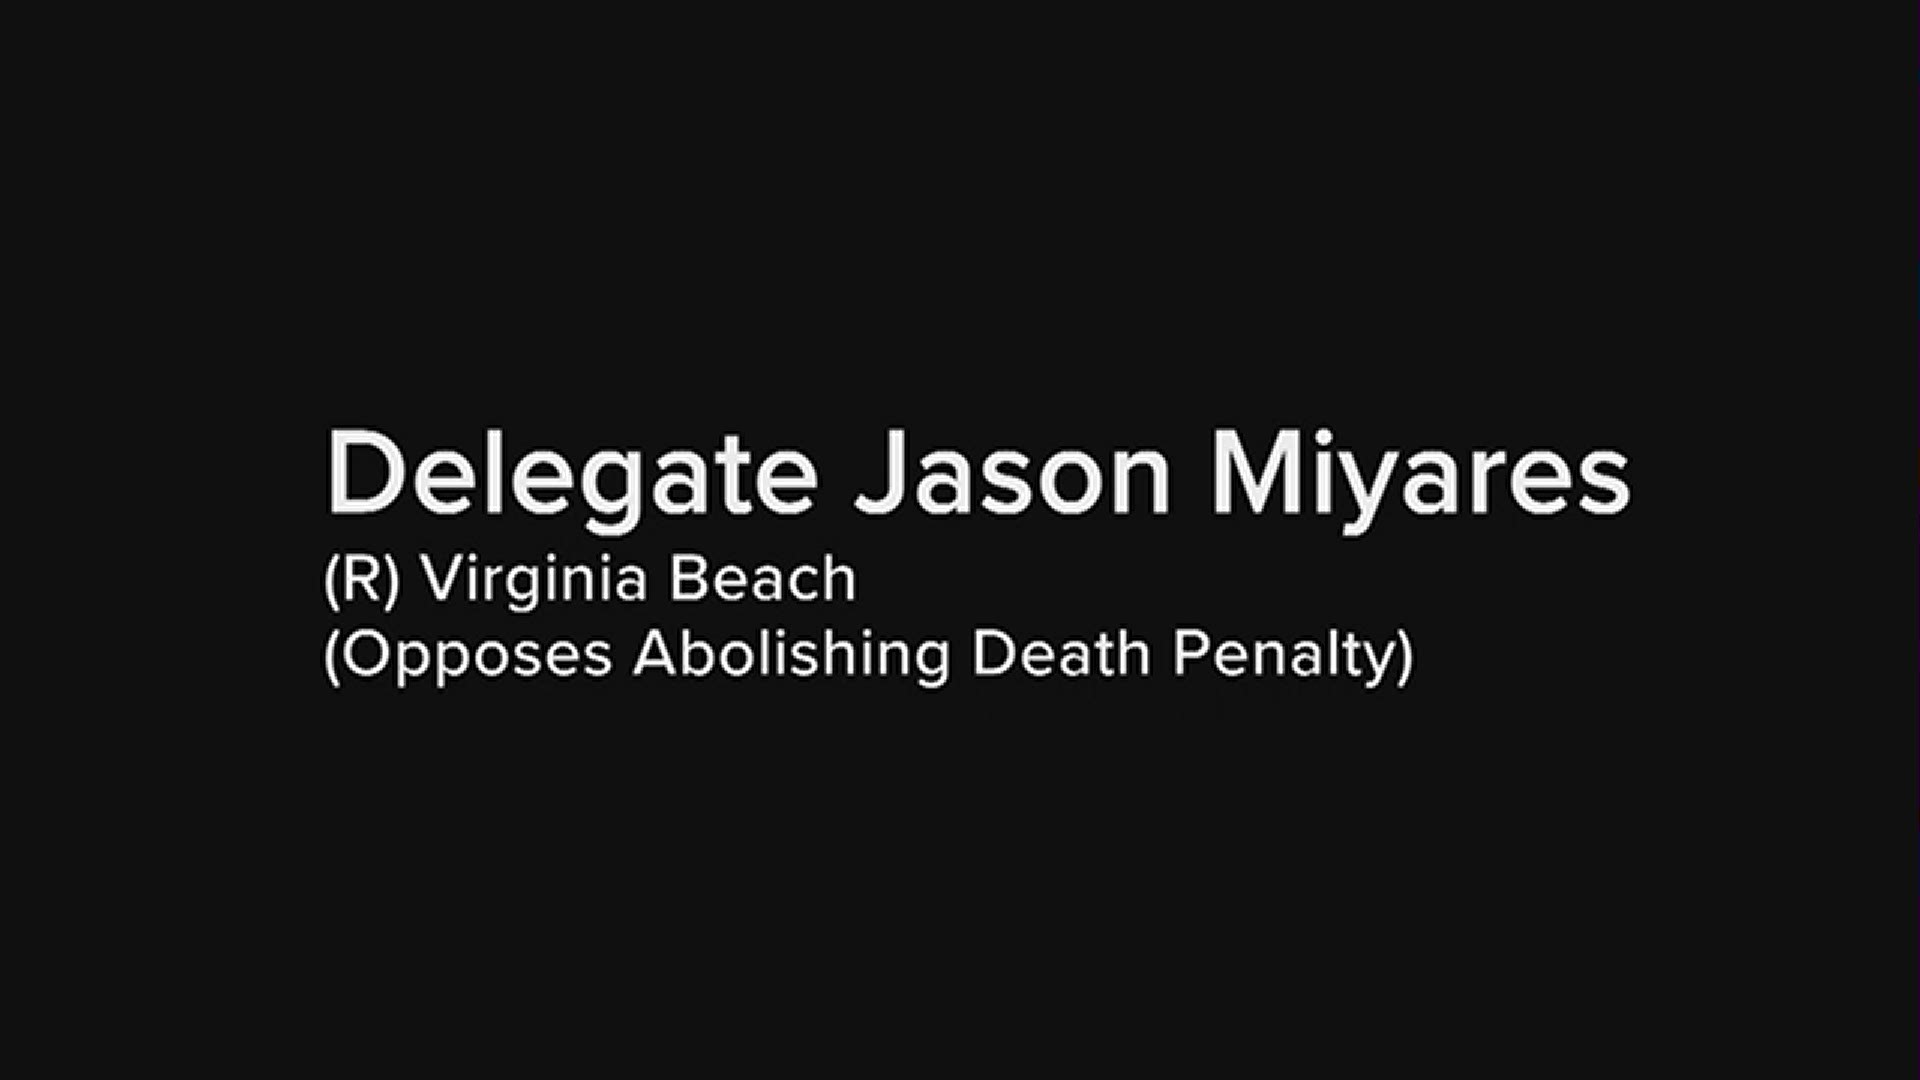 VA Delegate Jason Miyares, R - Virginia Beach, on why he opposes abolishing the death penalty in Virginia